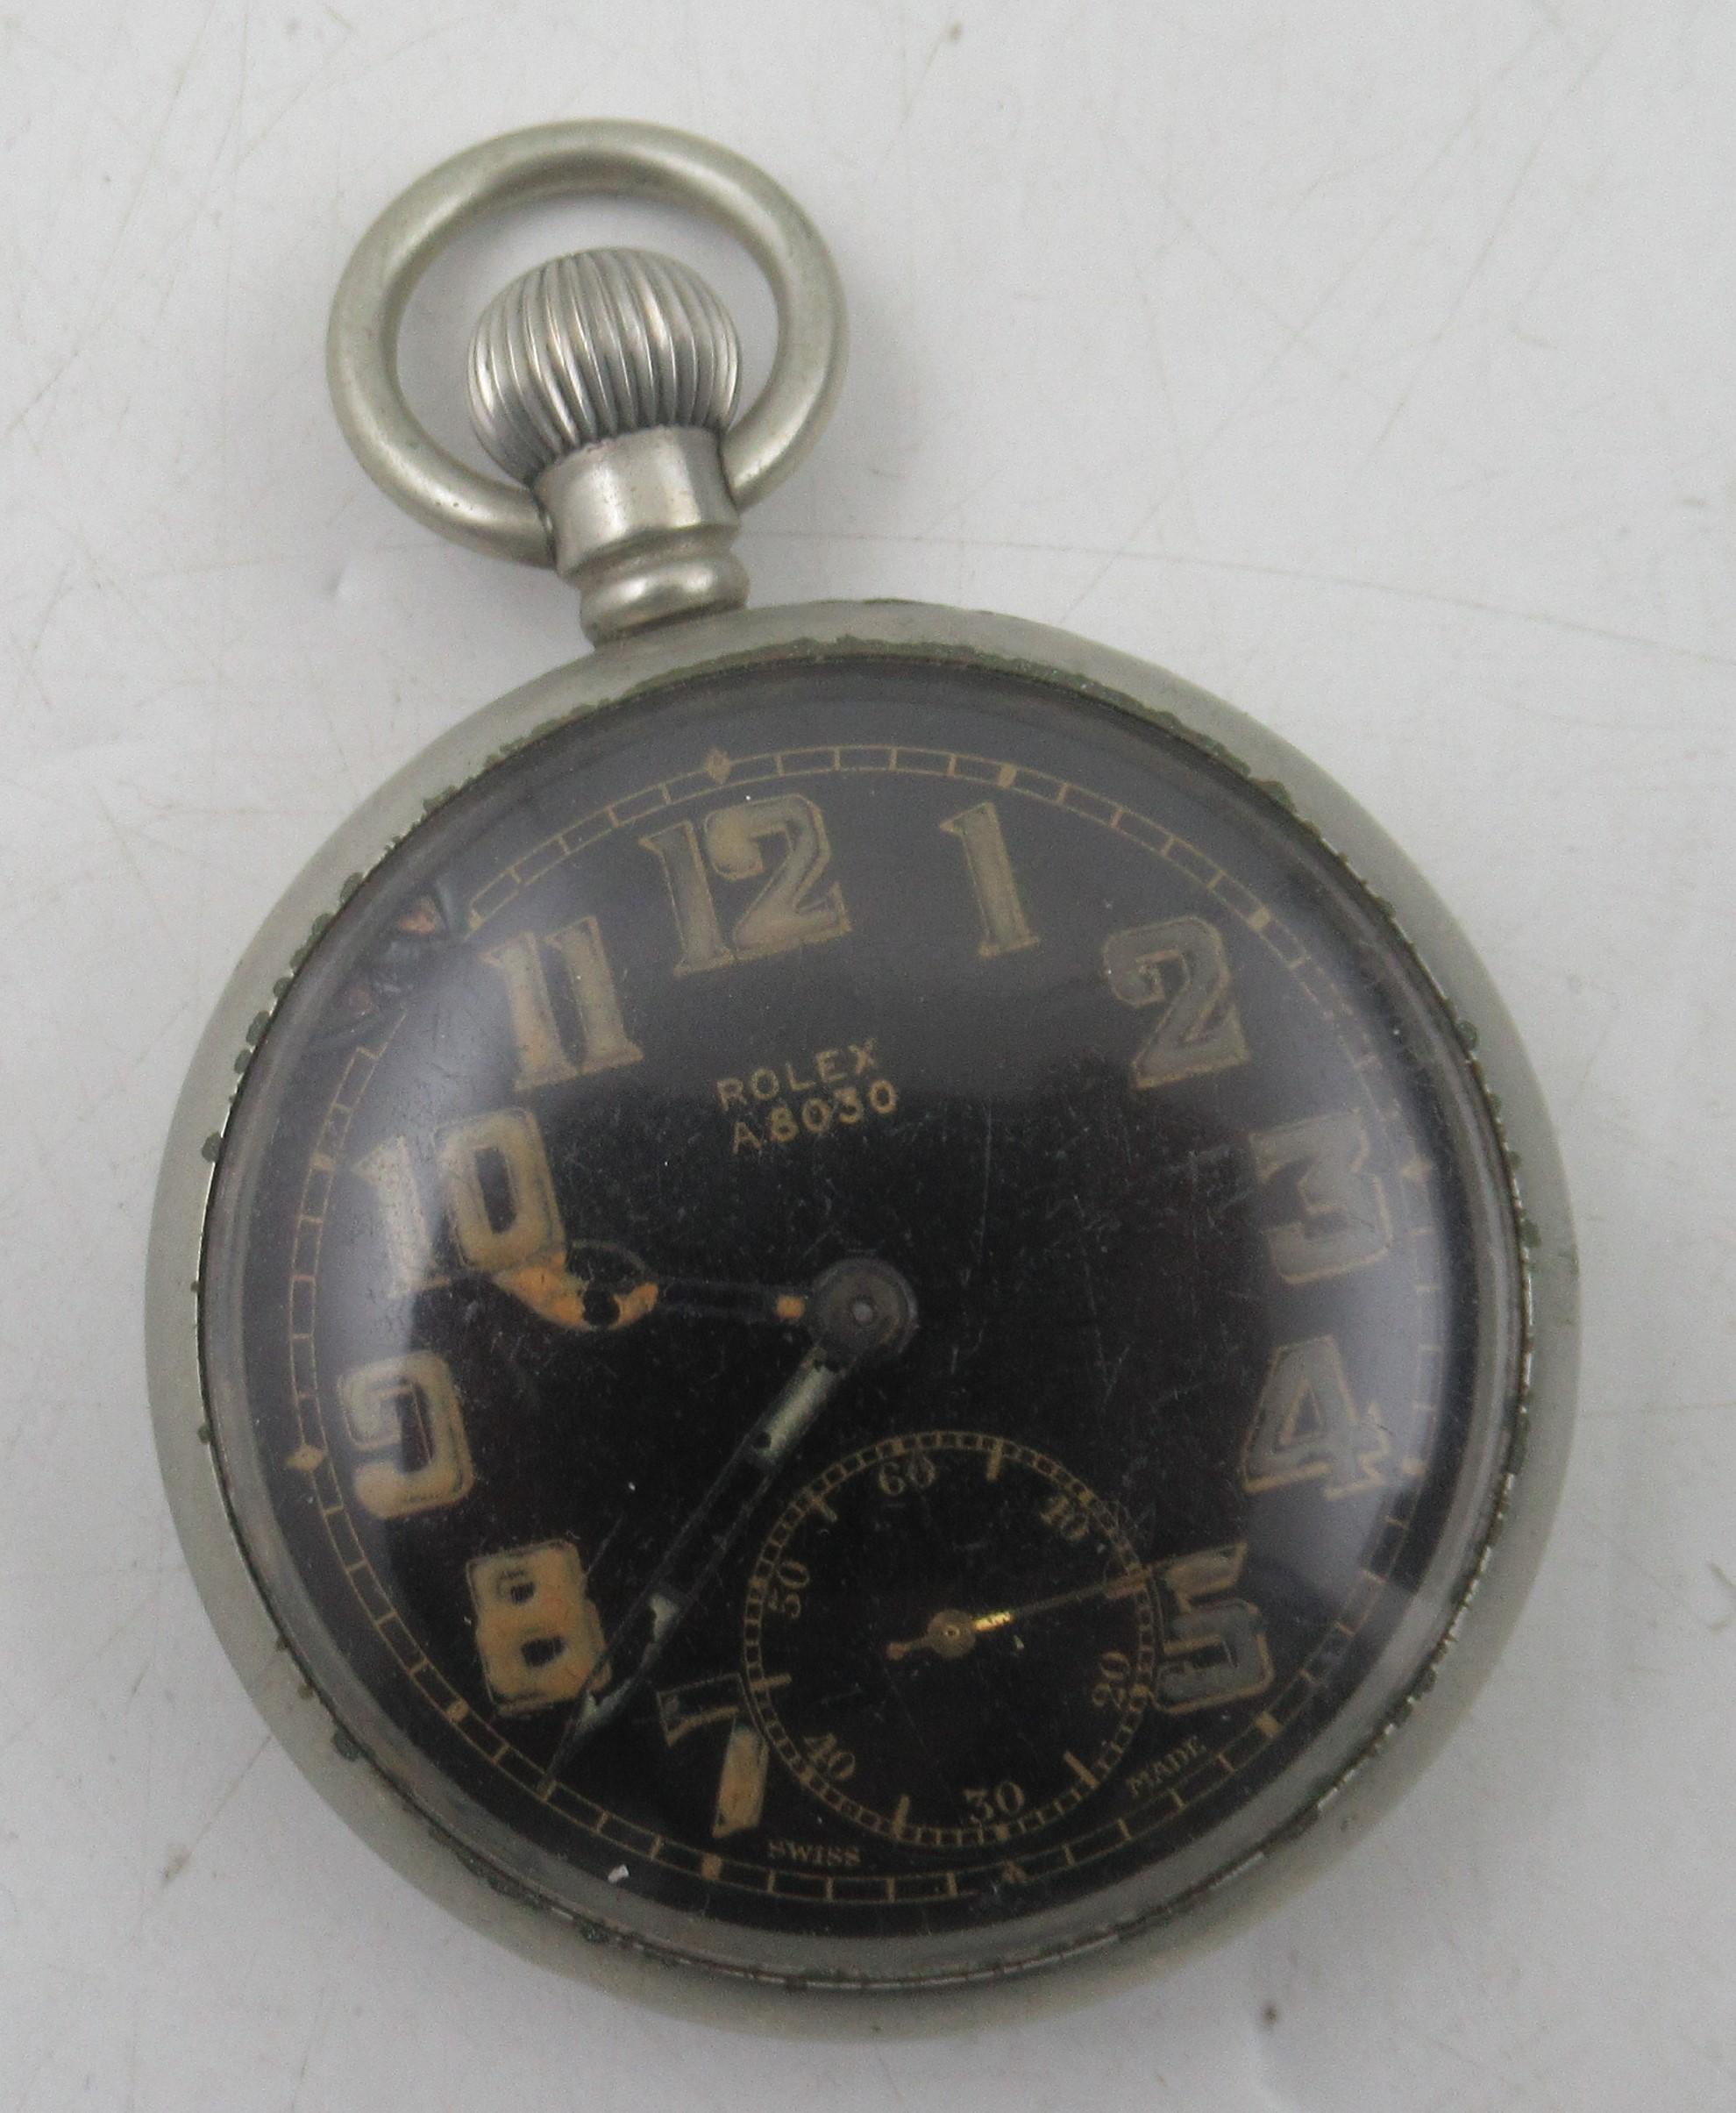 A Rolex military issue open face pocket watch, the black dial numbered A8030, the plated case